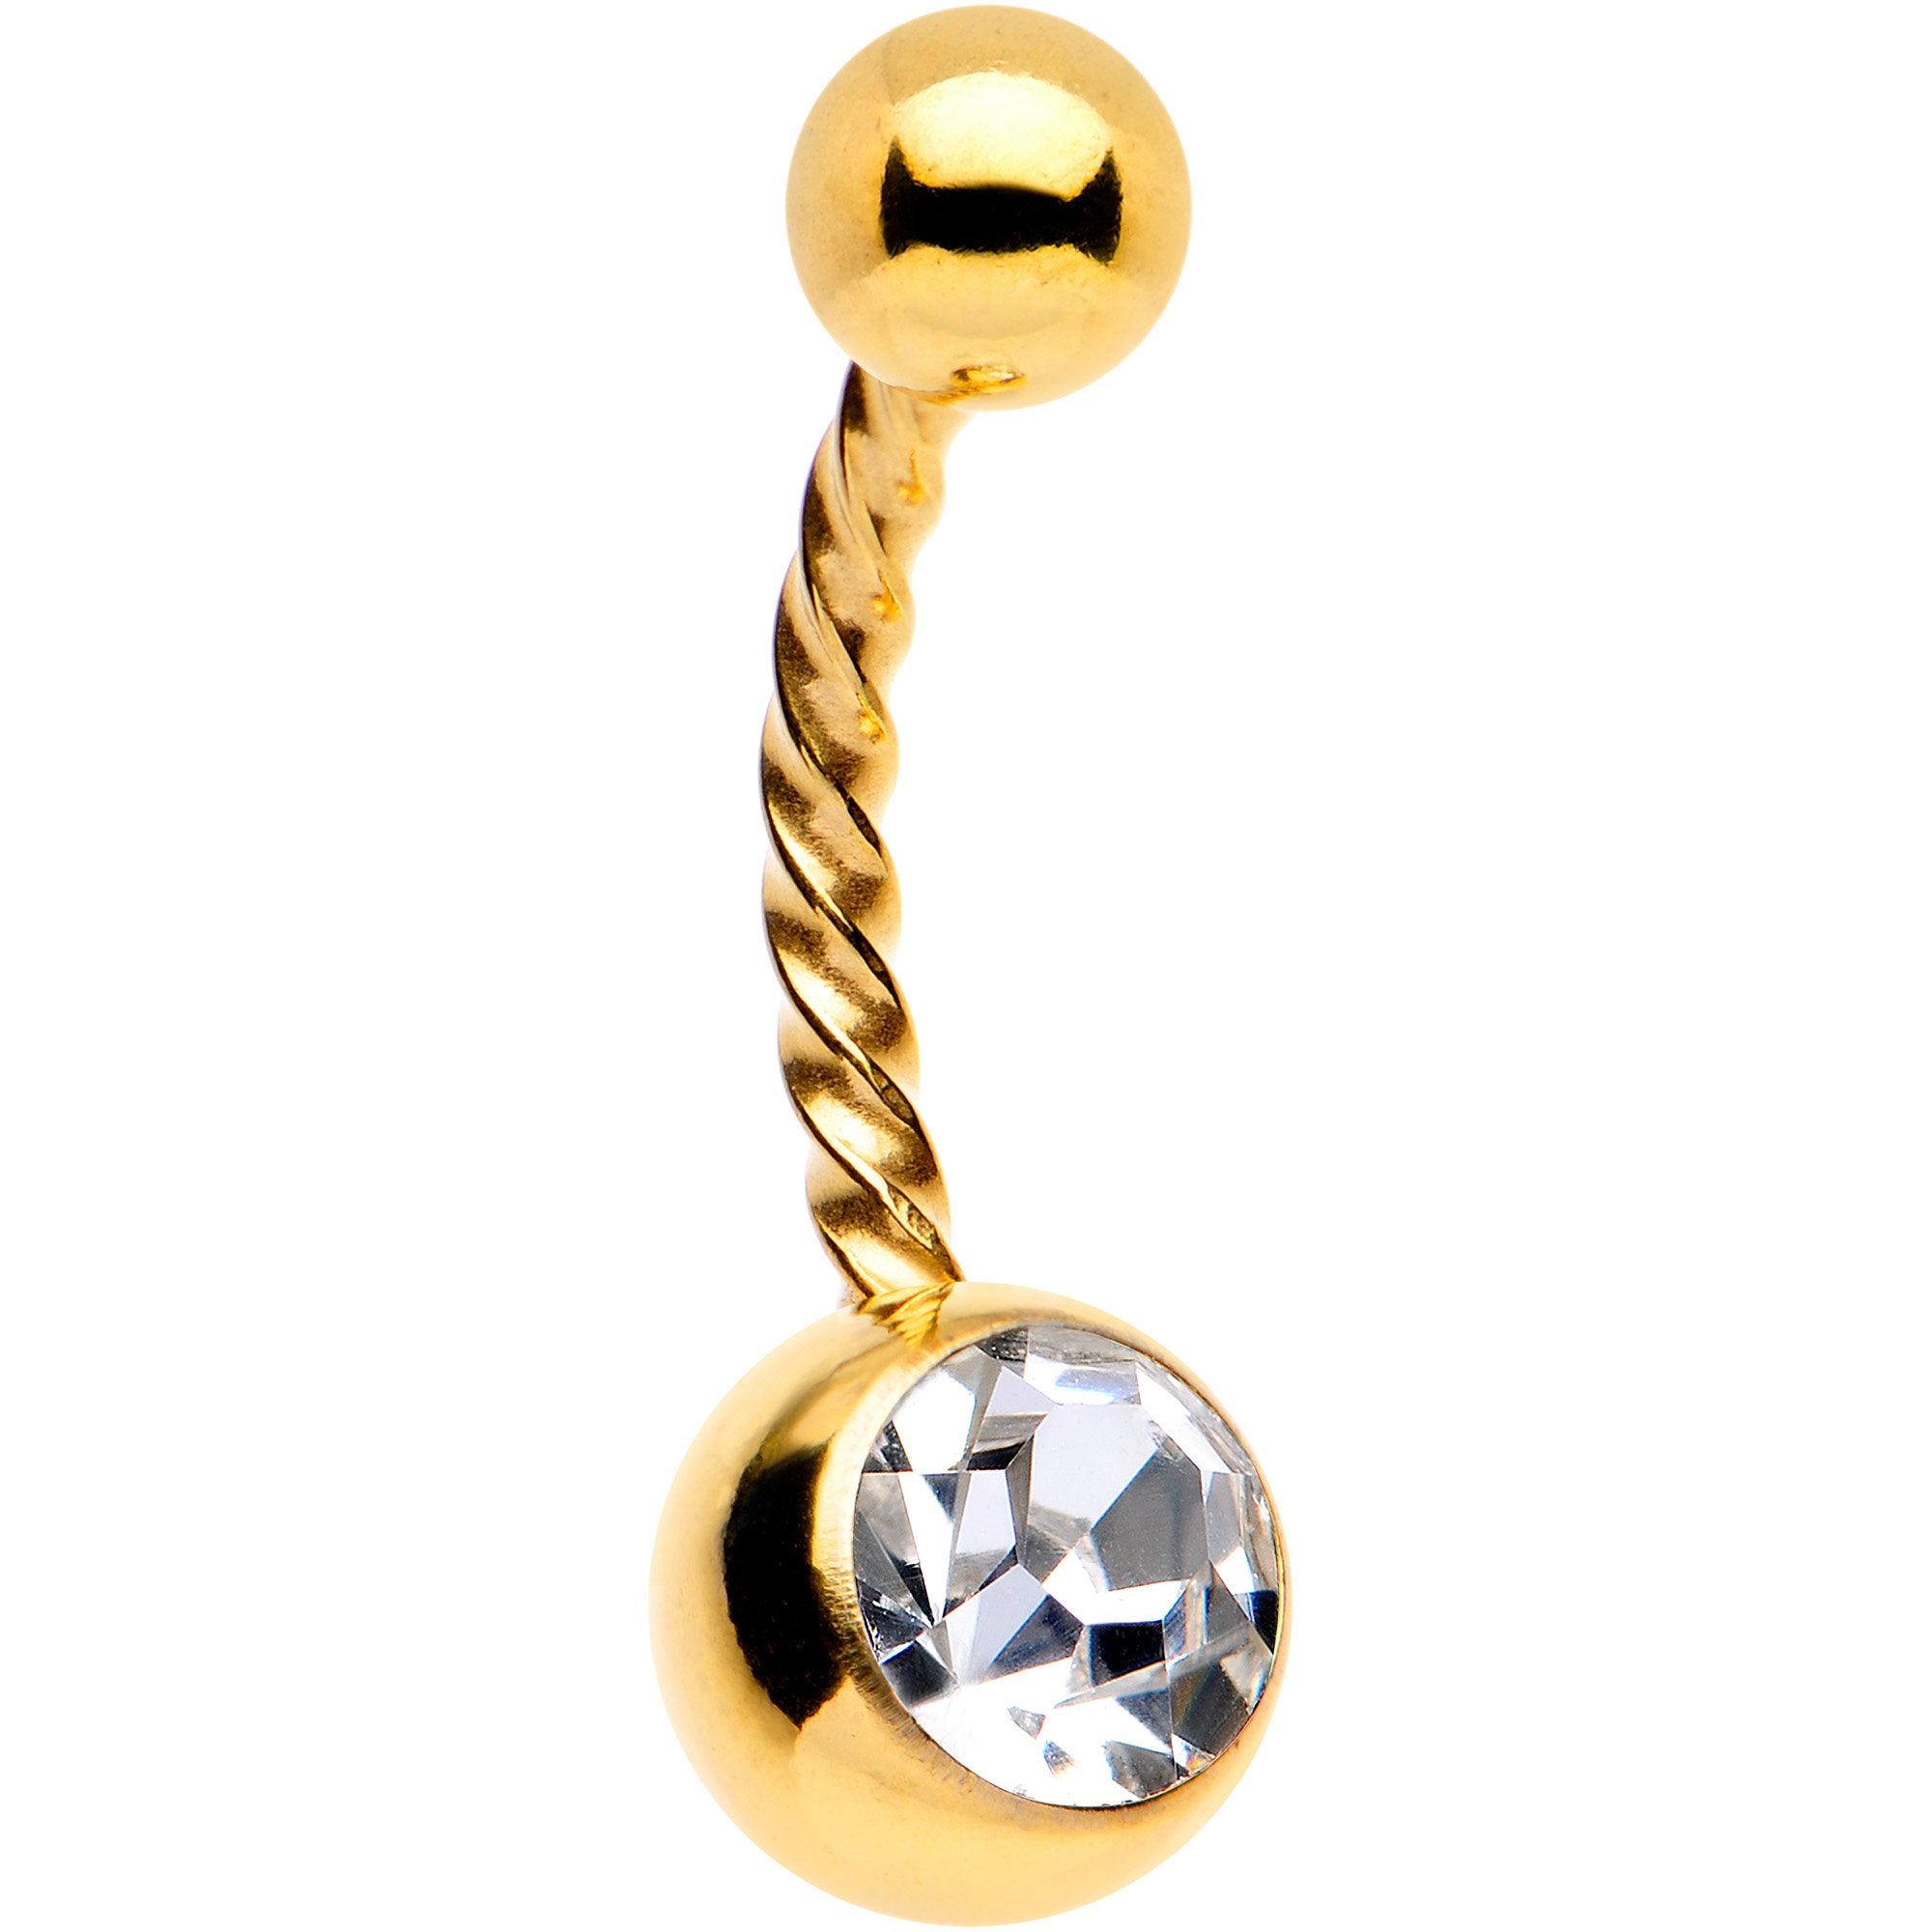 Clear Gem Gold Tone IP Seriously Twisted Belly Ring